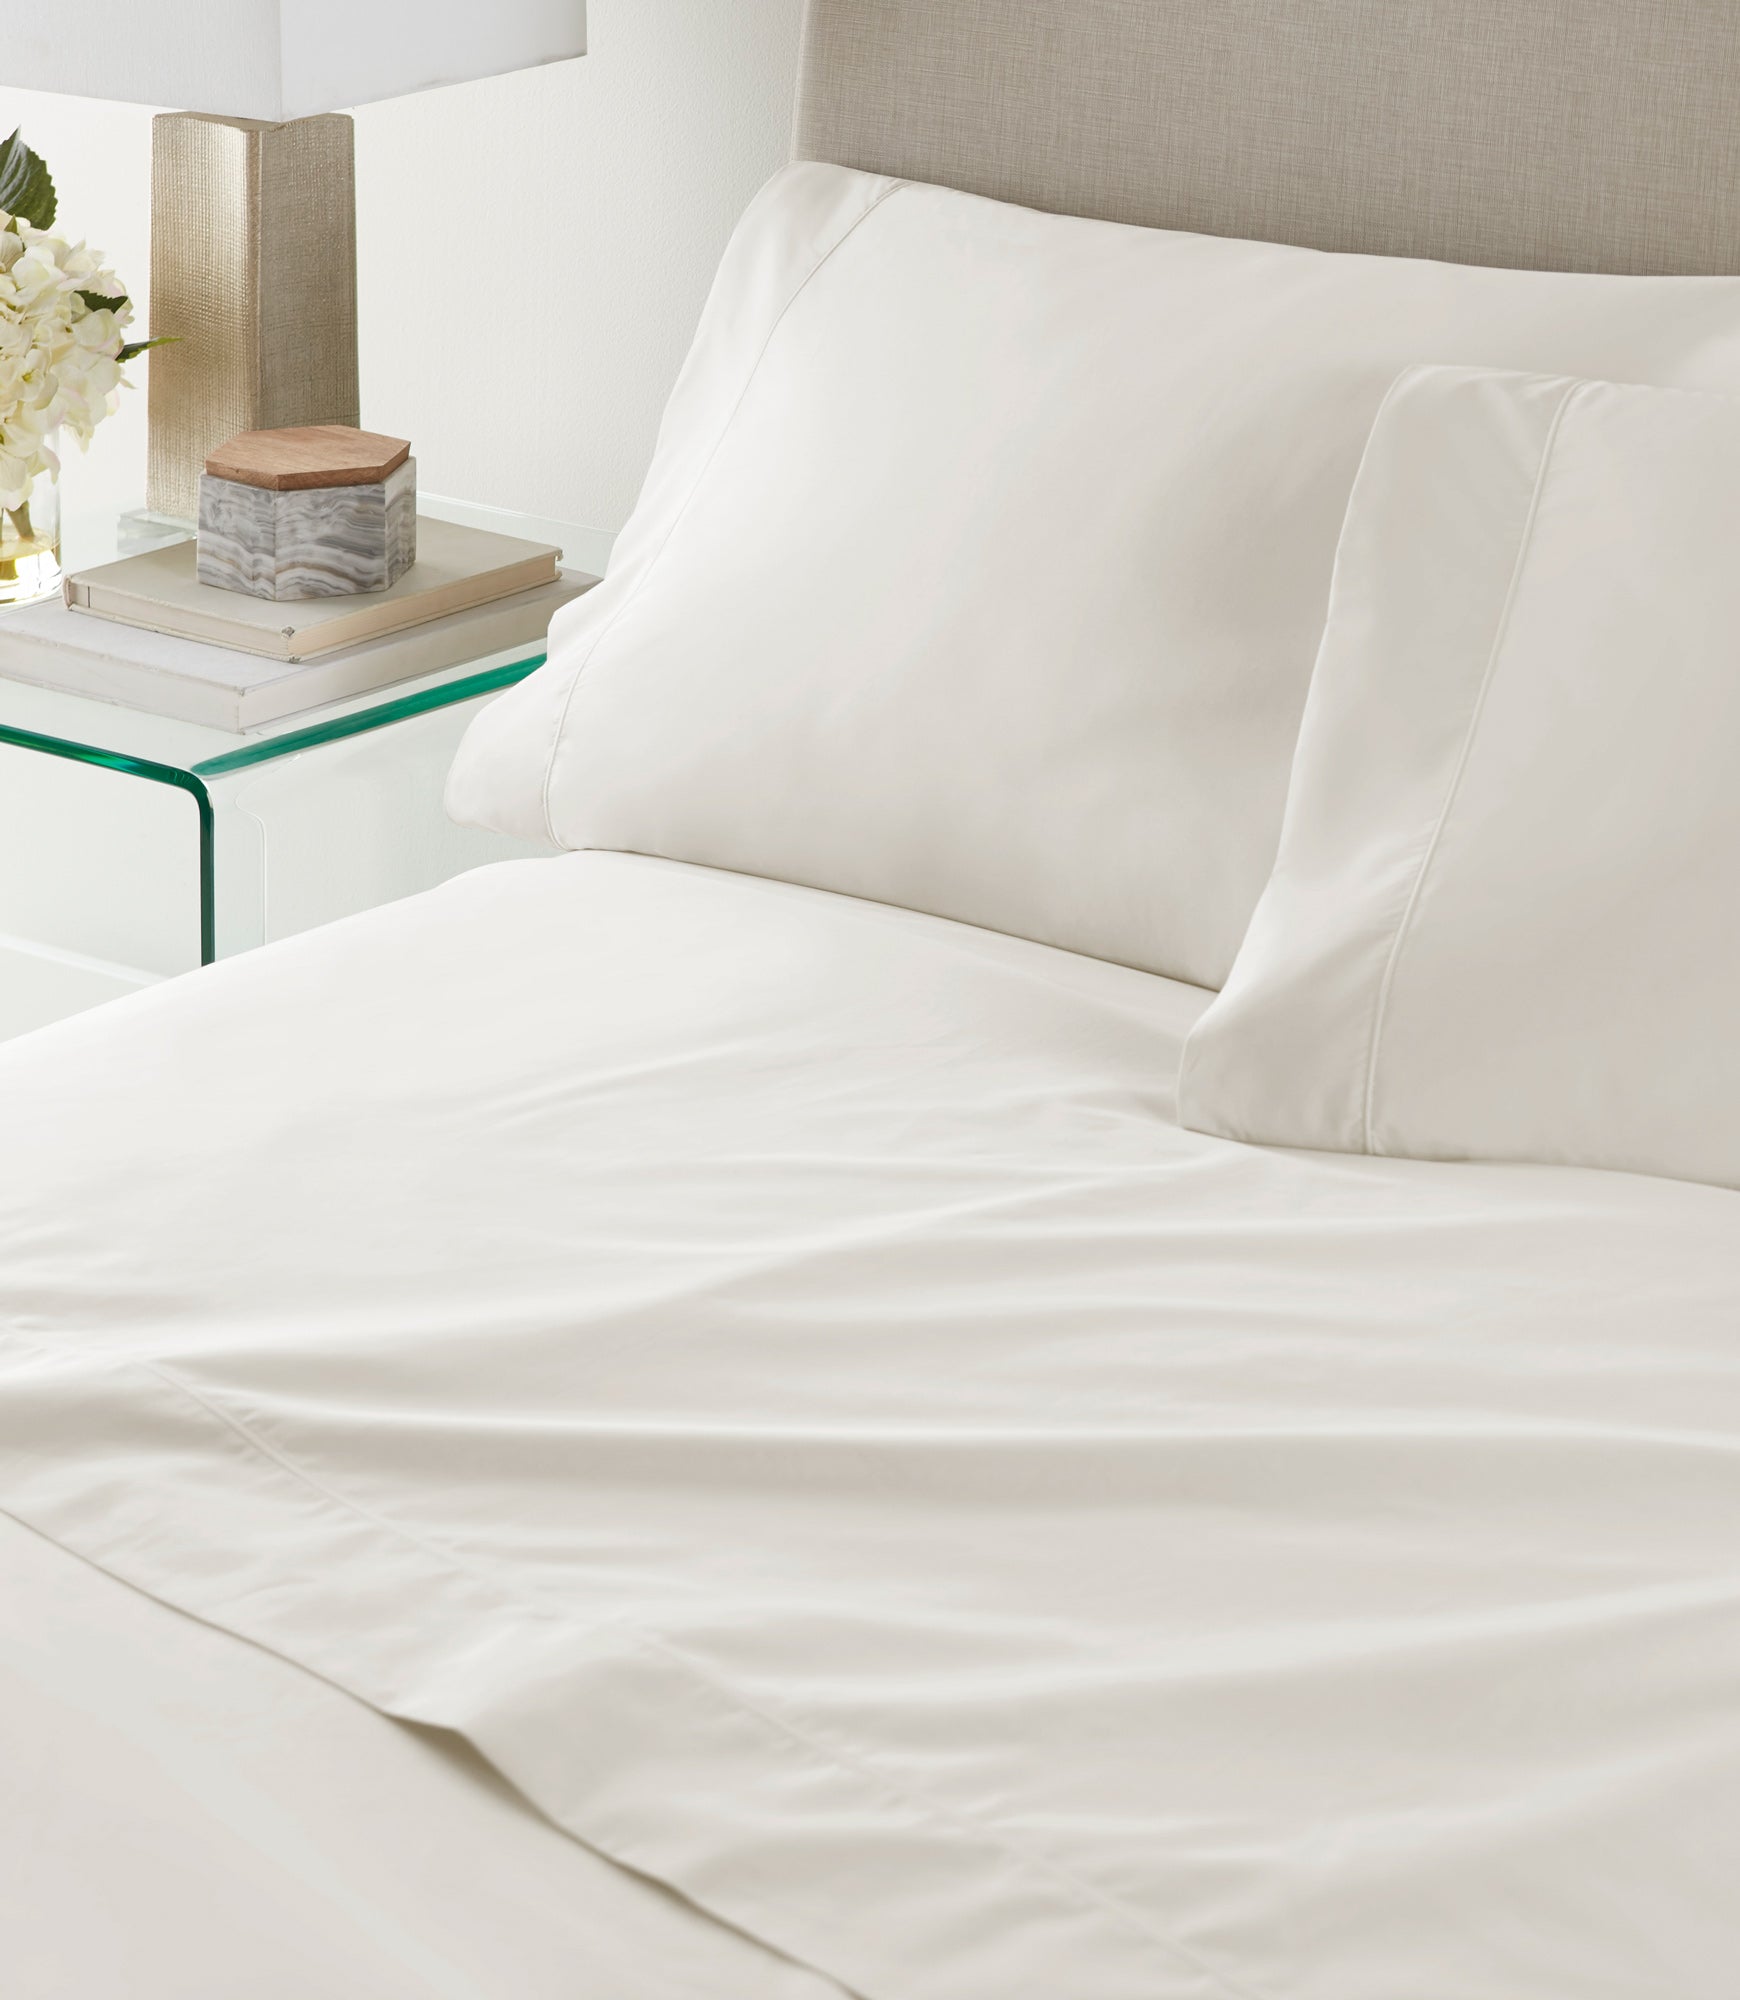 Nile Sheet Set Pearl on bed